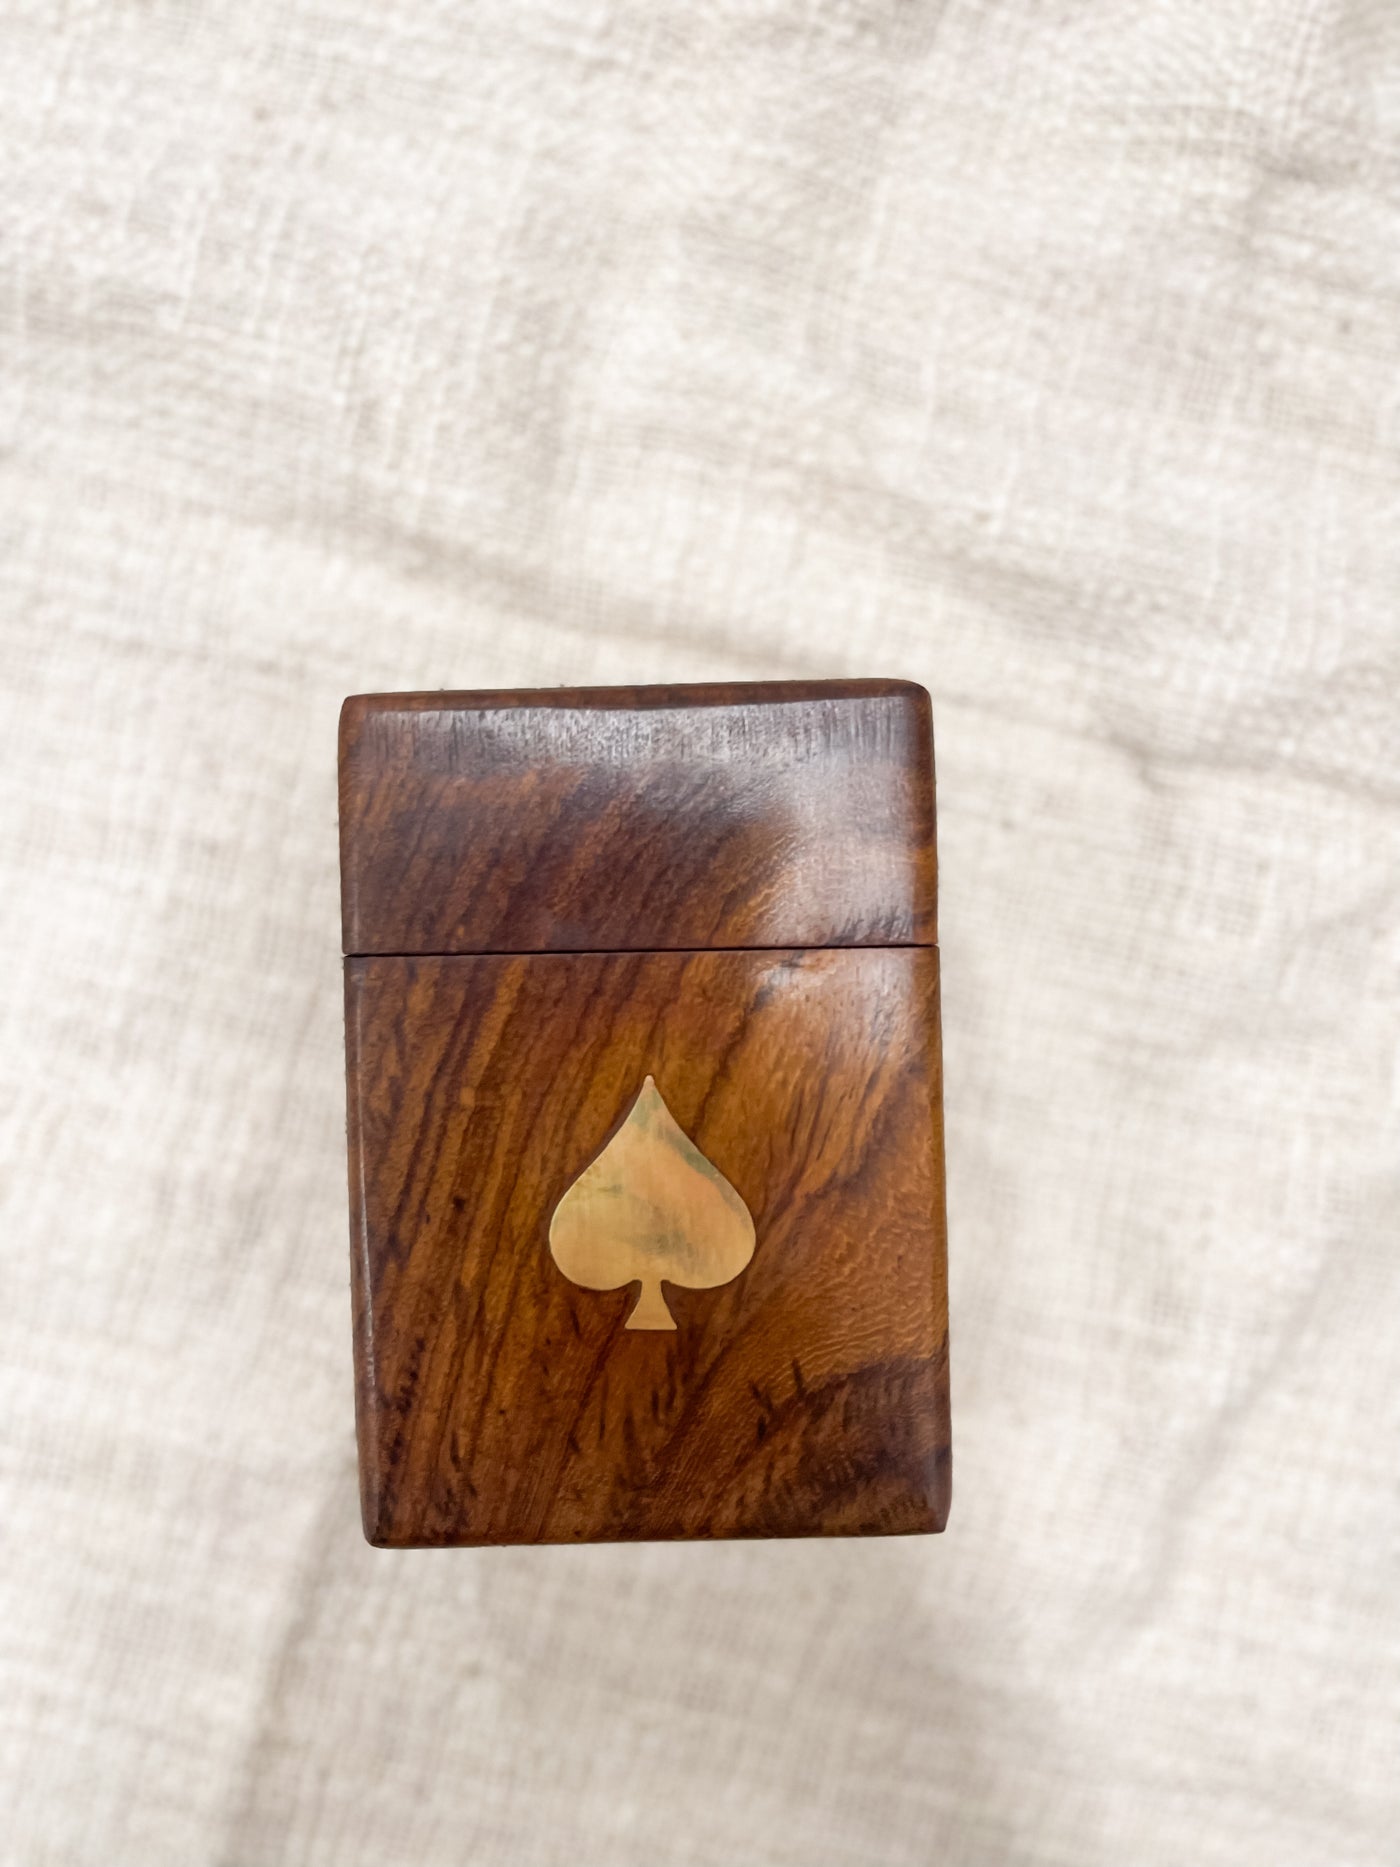 Wood Crafted Playing Card Set In Wooden Box